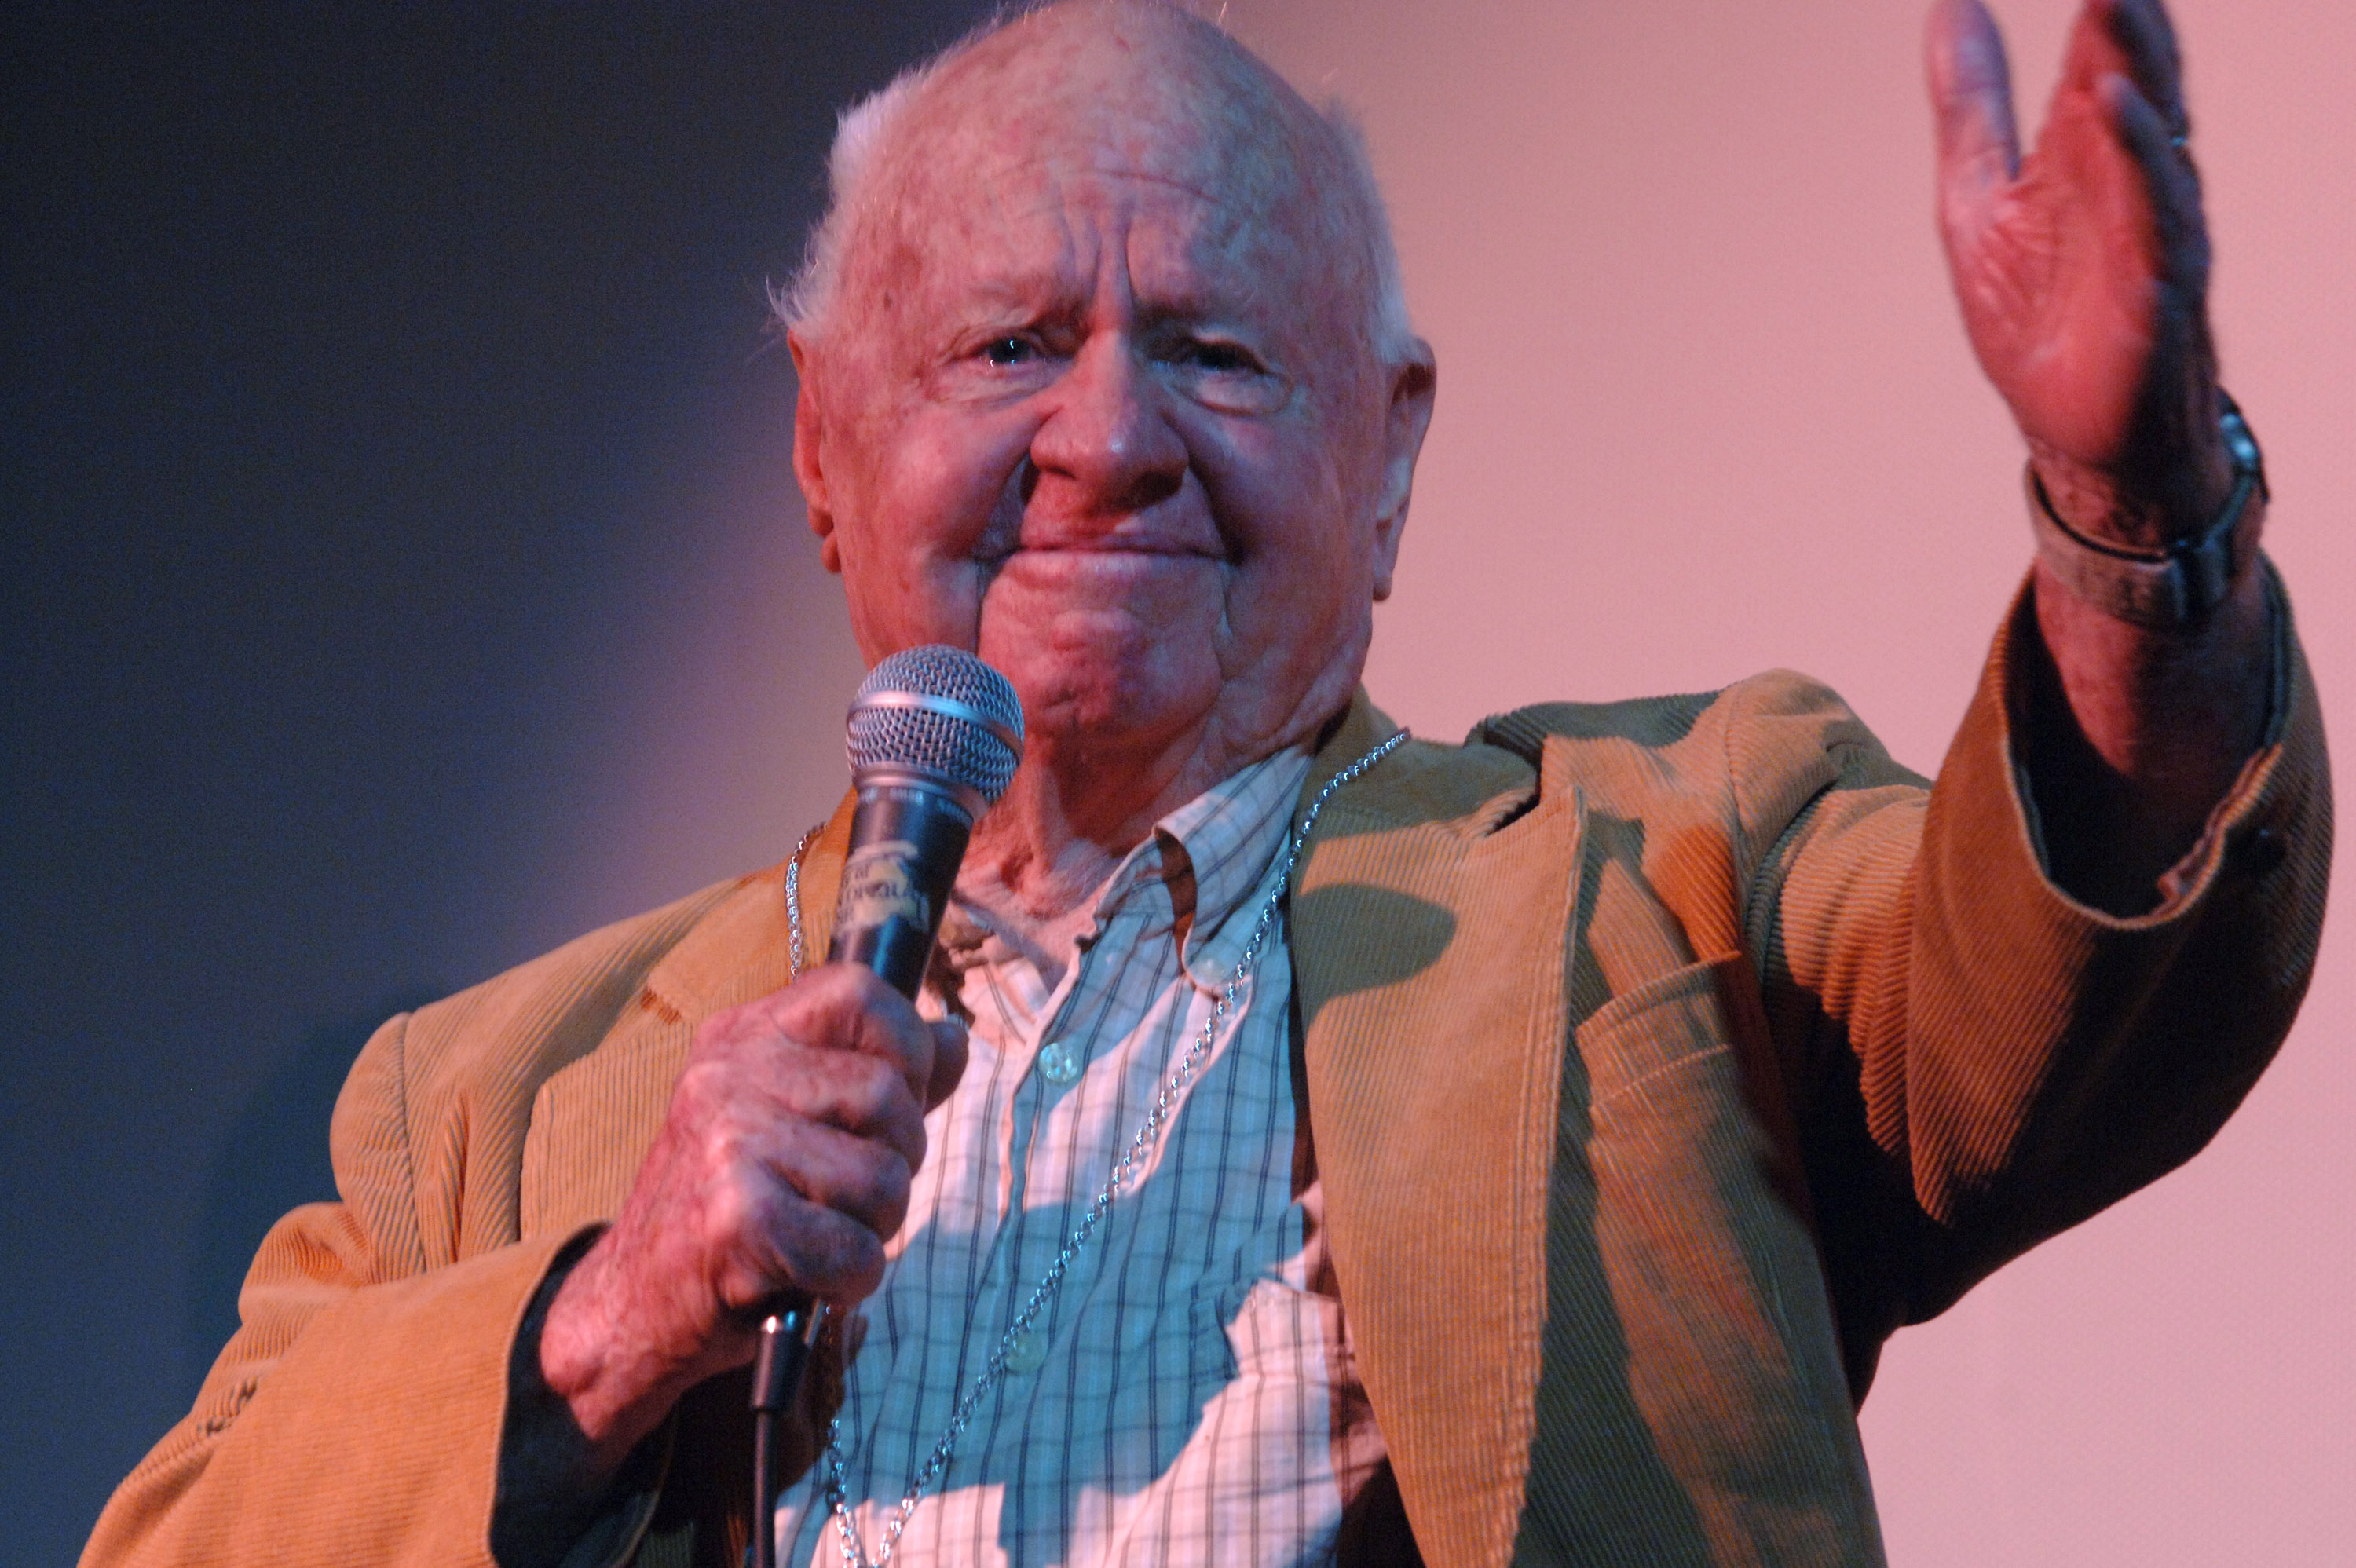 Mickey Rooney Receives the Festival Silver Medallion Award at the 32nd Telluride Film Festival. | Source: Getty Images